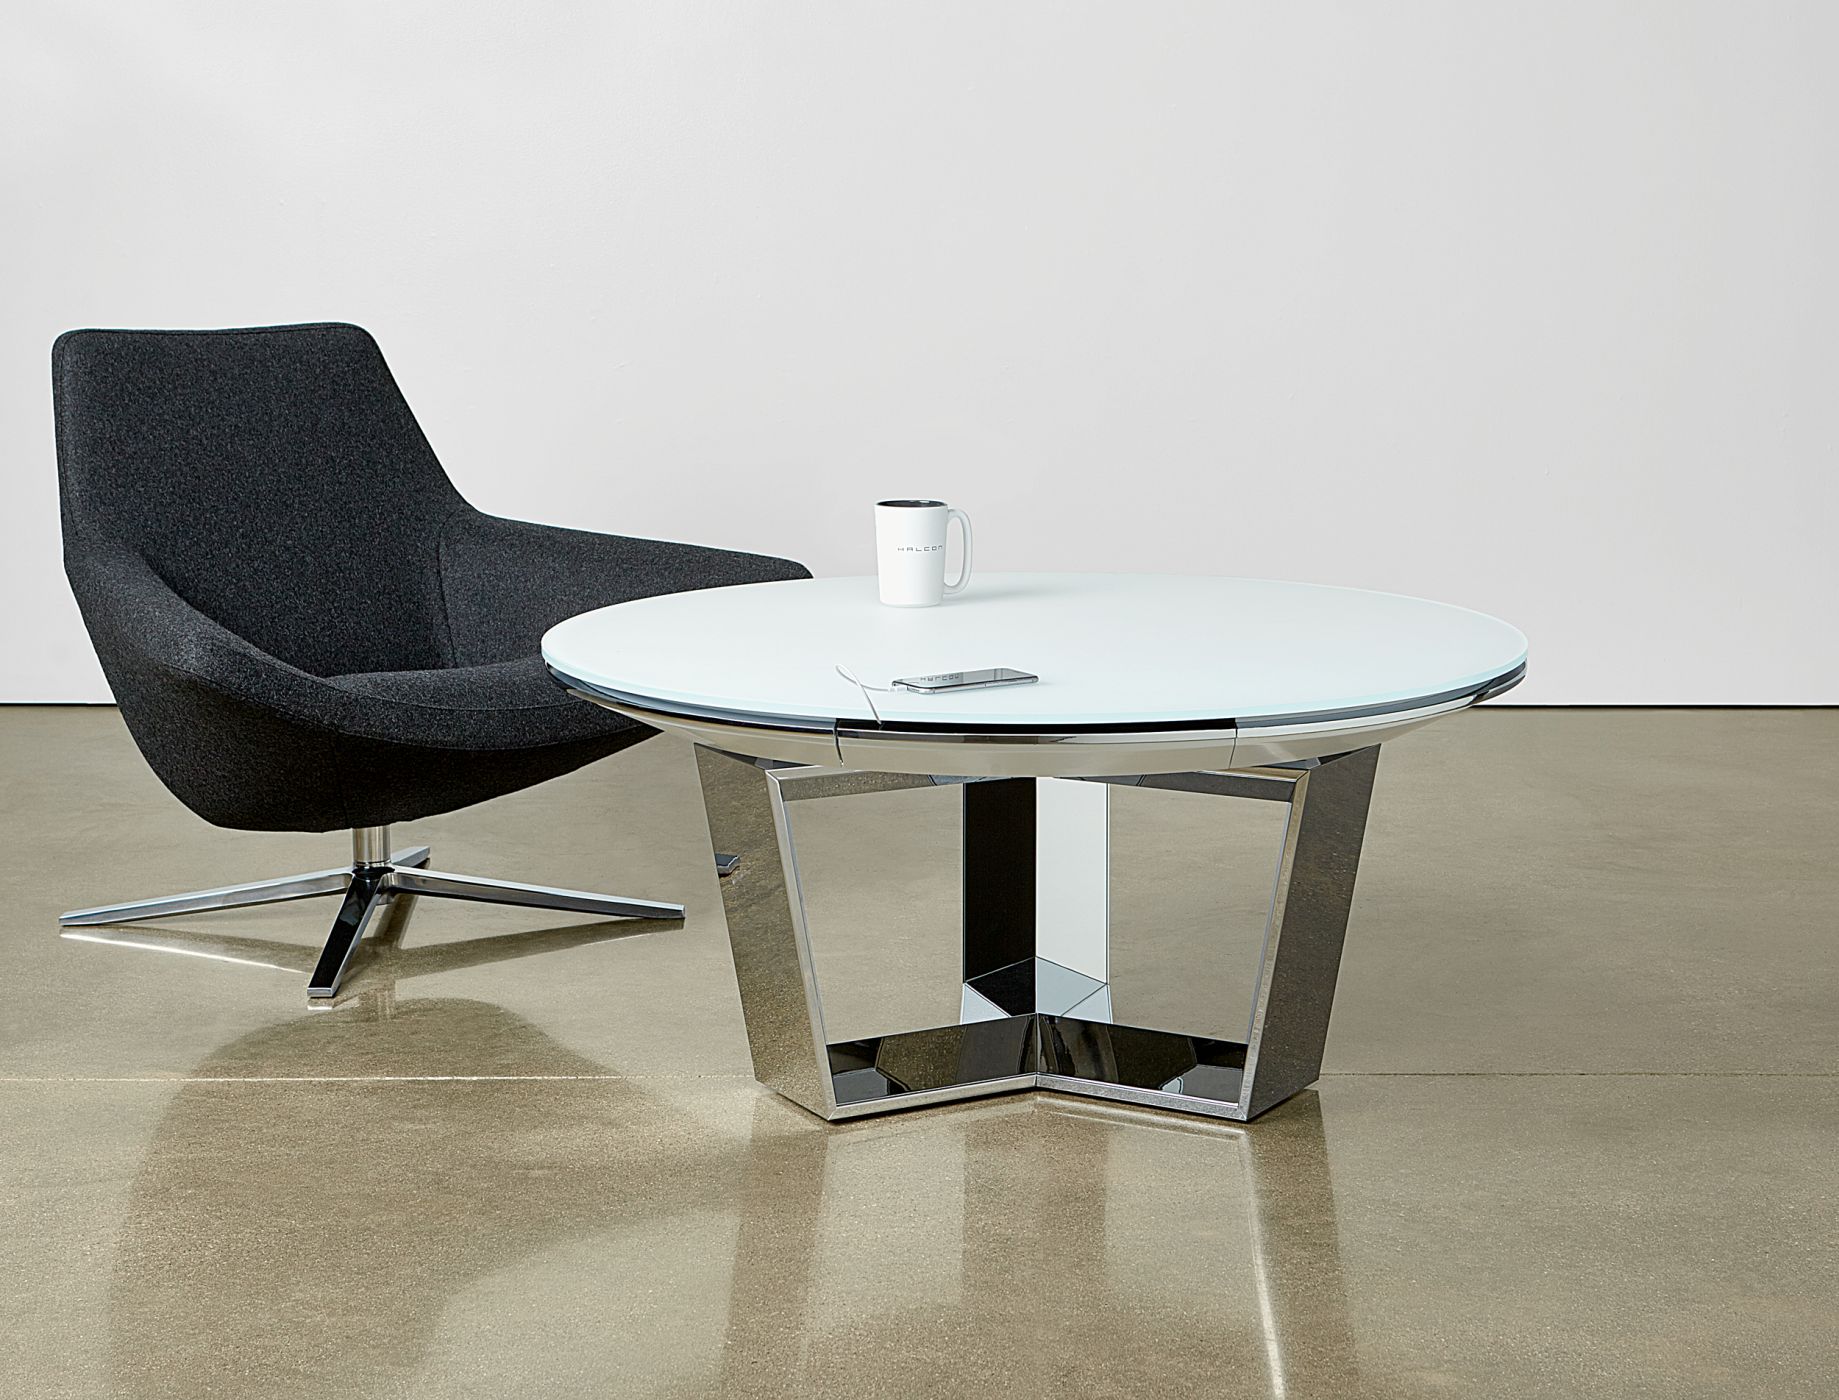 Mesa occasional tables deliver innovative beauty and connectivity to informal meeting spaces.